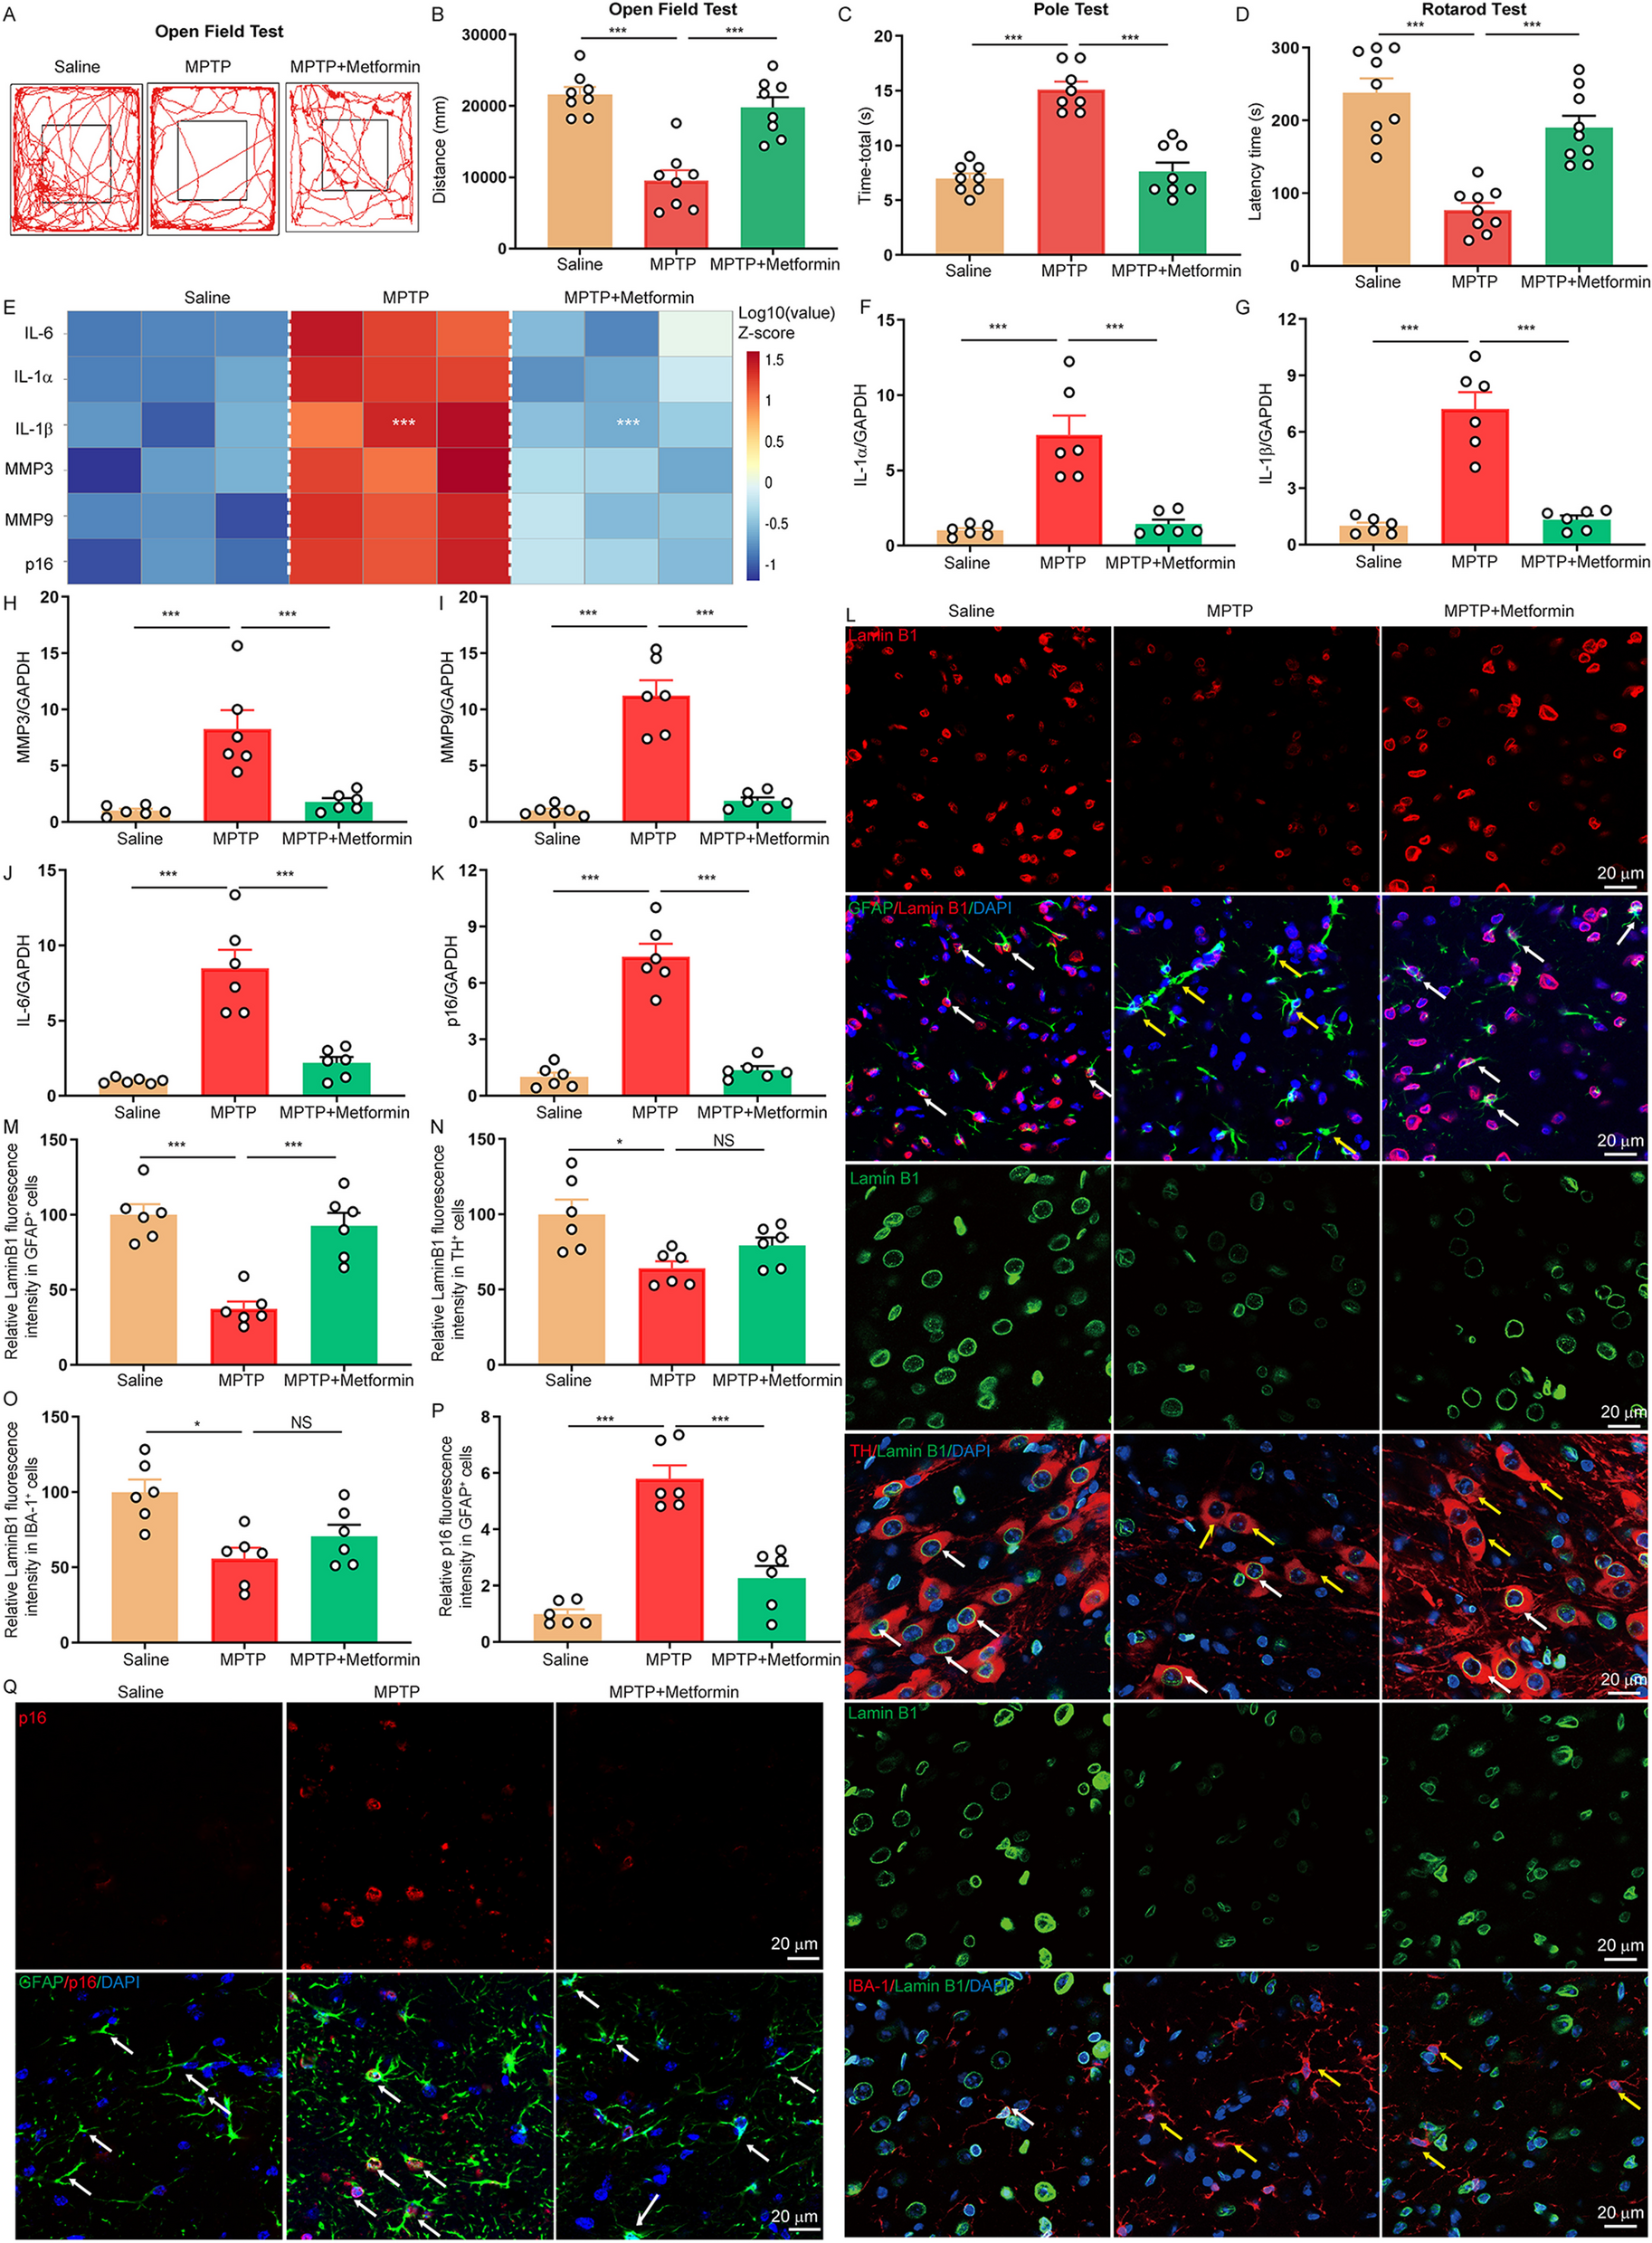 Metformin normalizes mitochondrial function to delay astrocyte senescence in a mouse model of Parkinson’s disease through Mfn2-cGAS signaling